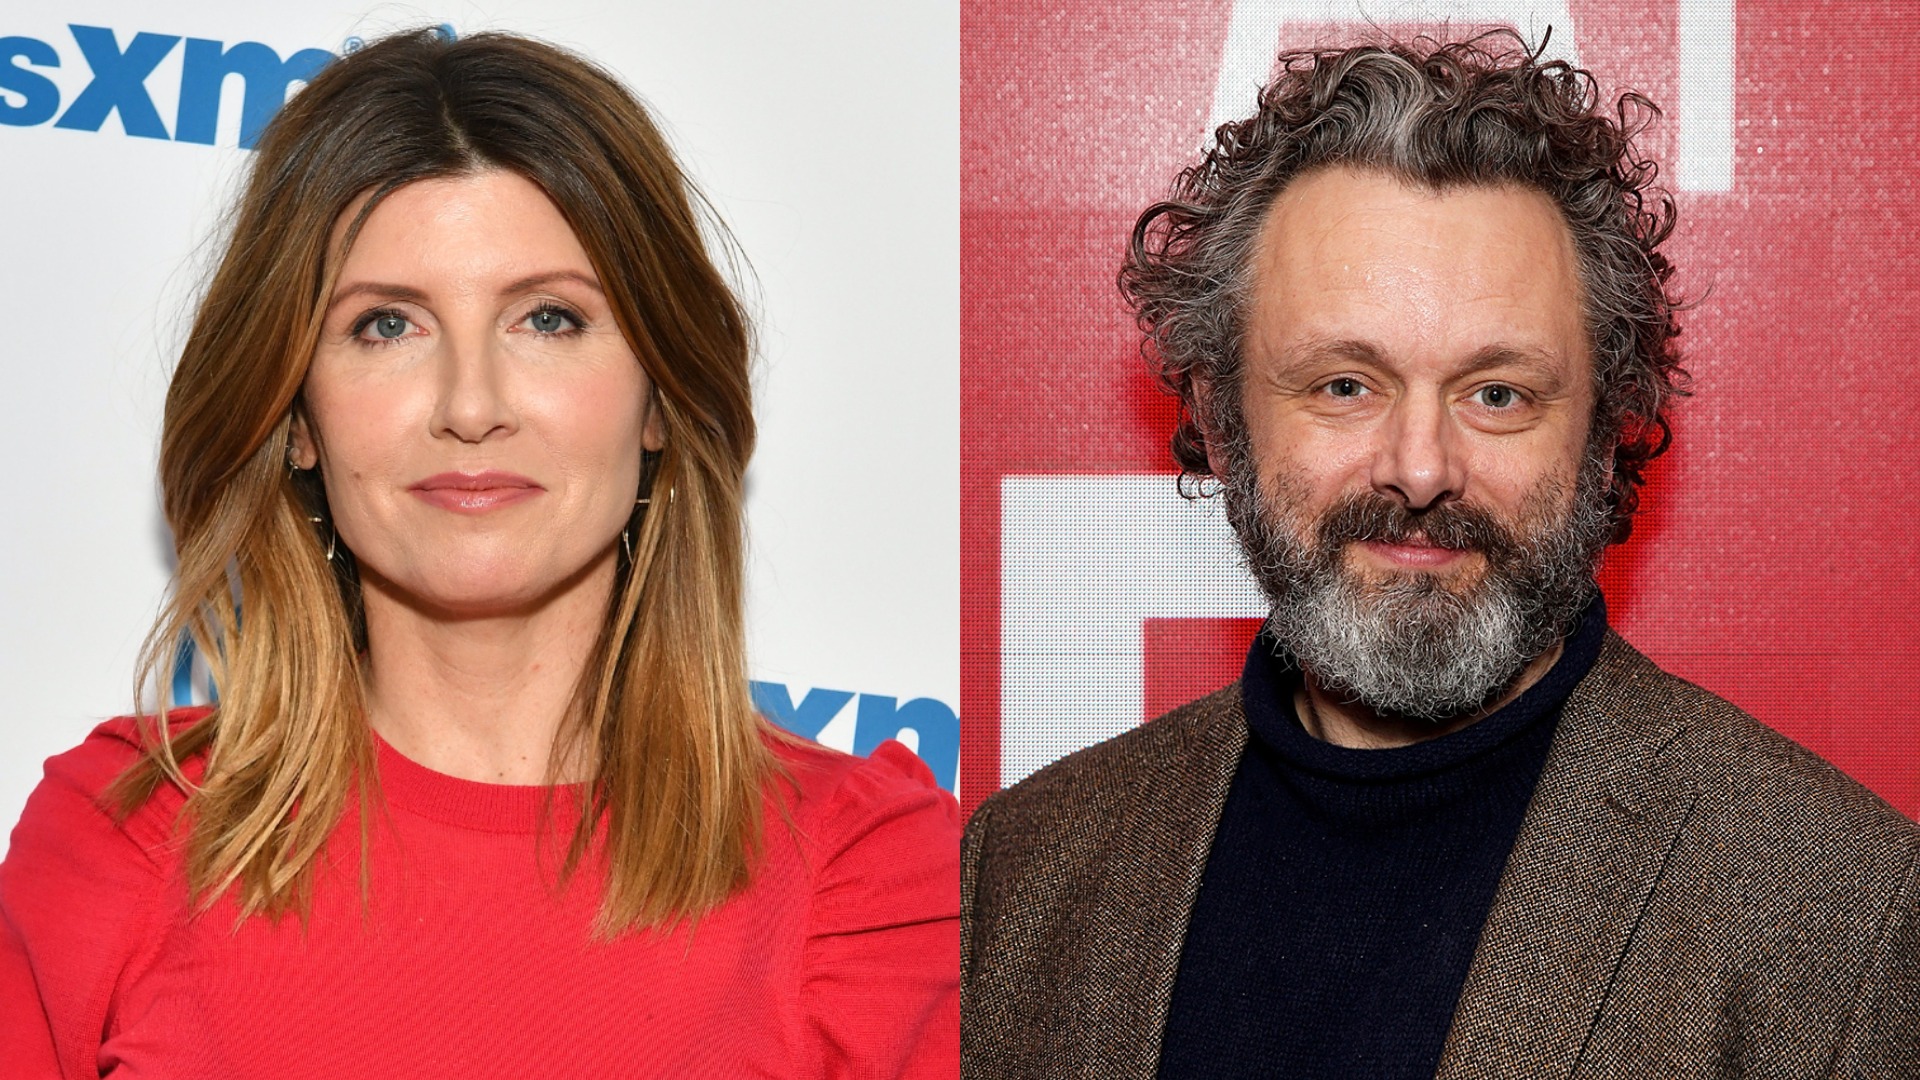 Media outlets are reporting that Sharon Horgan and Michael Sheen have been announced as the leads for the Jack Thorne-scripted BBC One drama Best Interests.